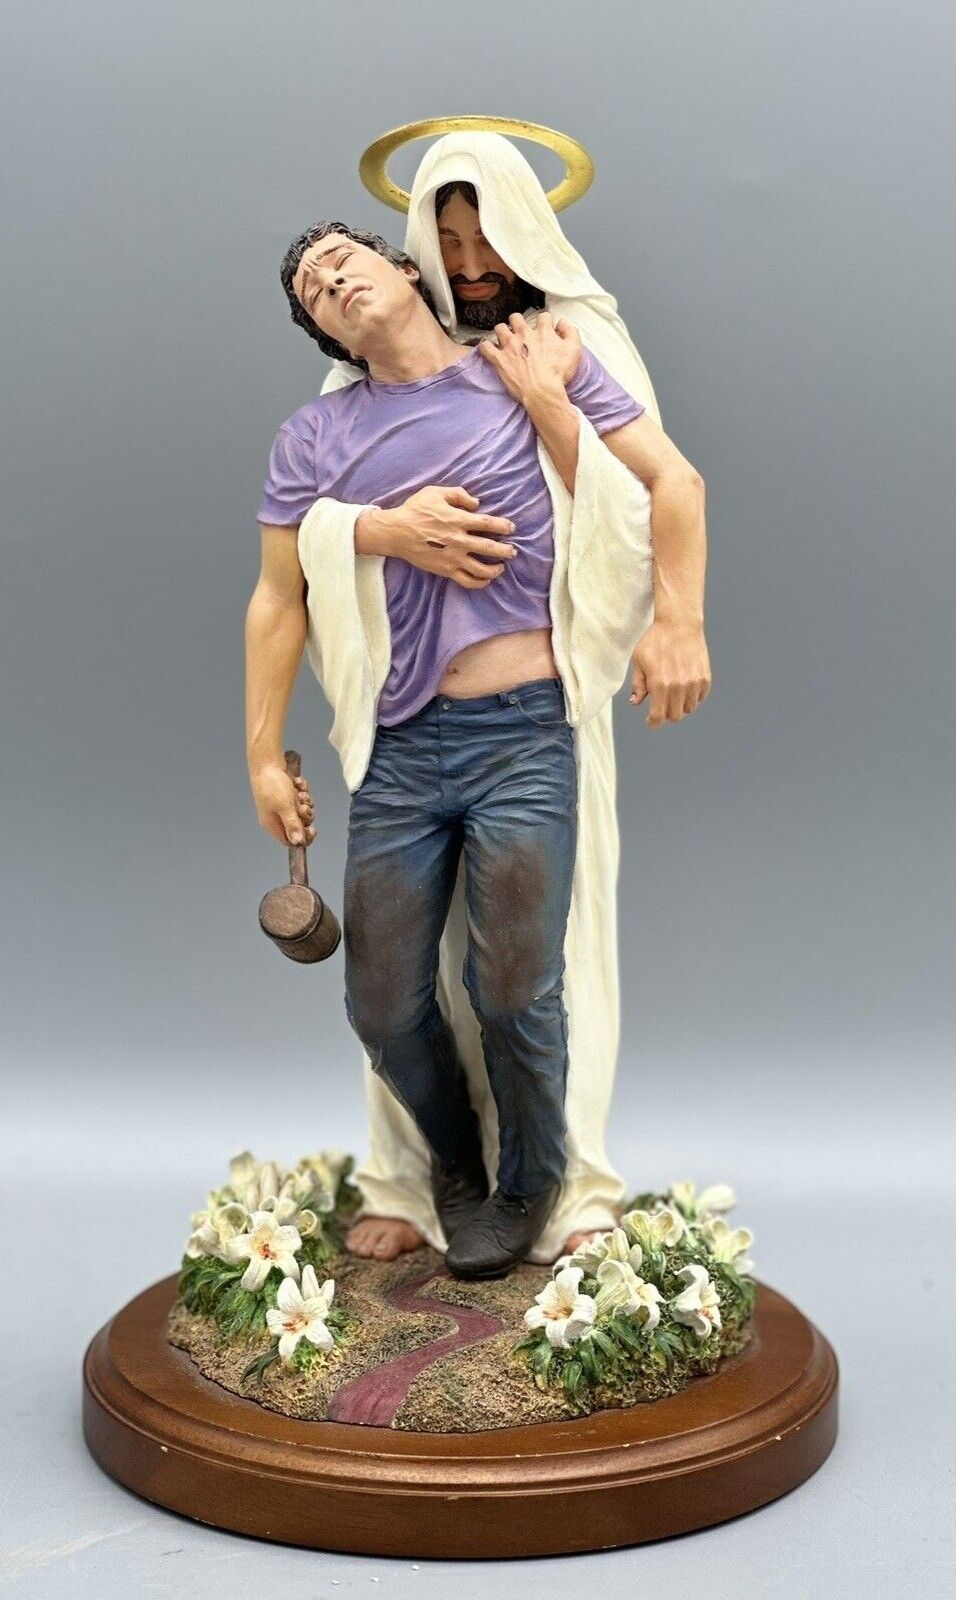 Jesus Forgiven The Master Peace Collection Beta Issue Statue Figurine 